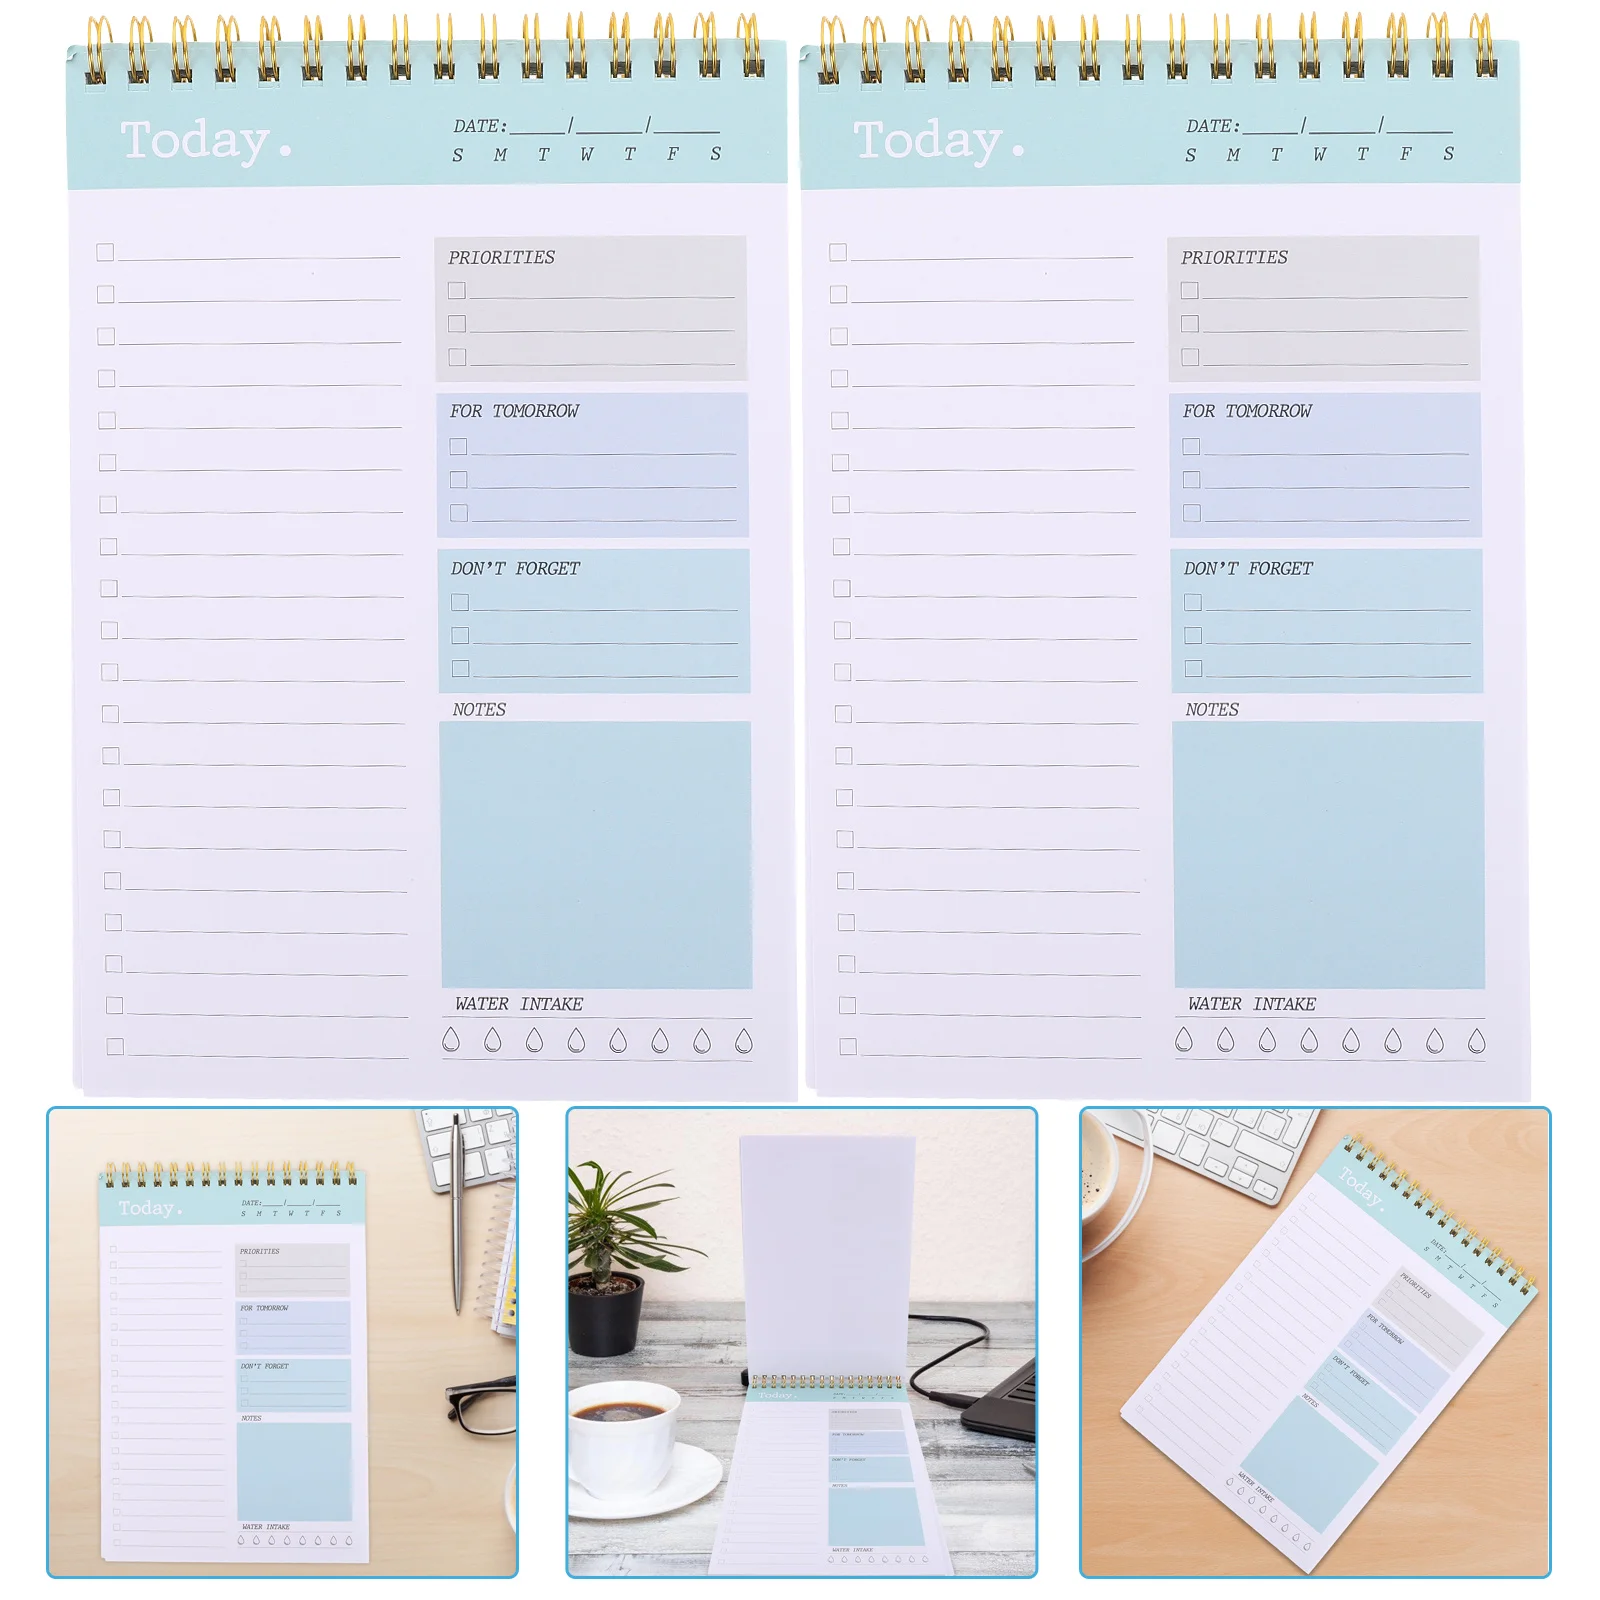 2 Pcs Notebooks A5 Loose-leaf Coil Weekly Planner Color Full English Flip-up 2pcs Memo Pads to Do List Grocery Cell Phone Work